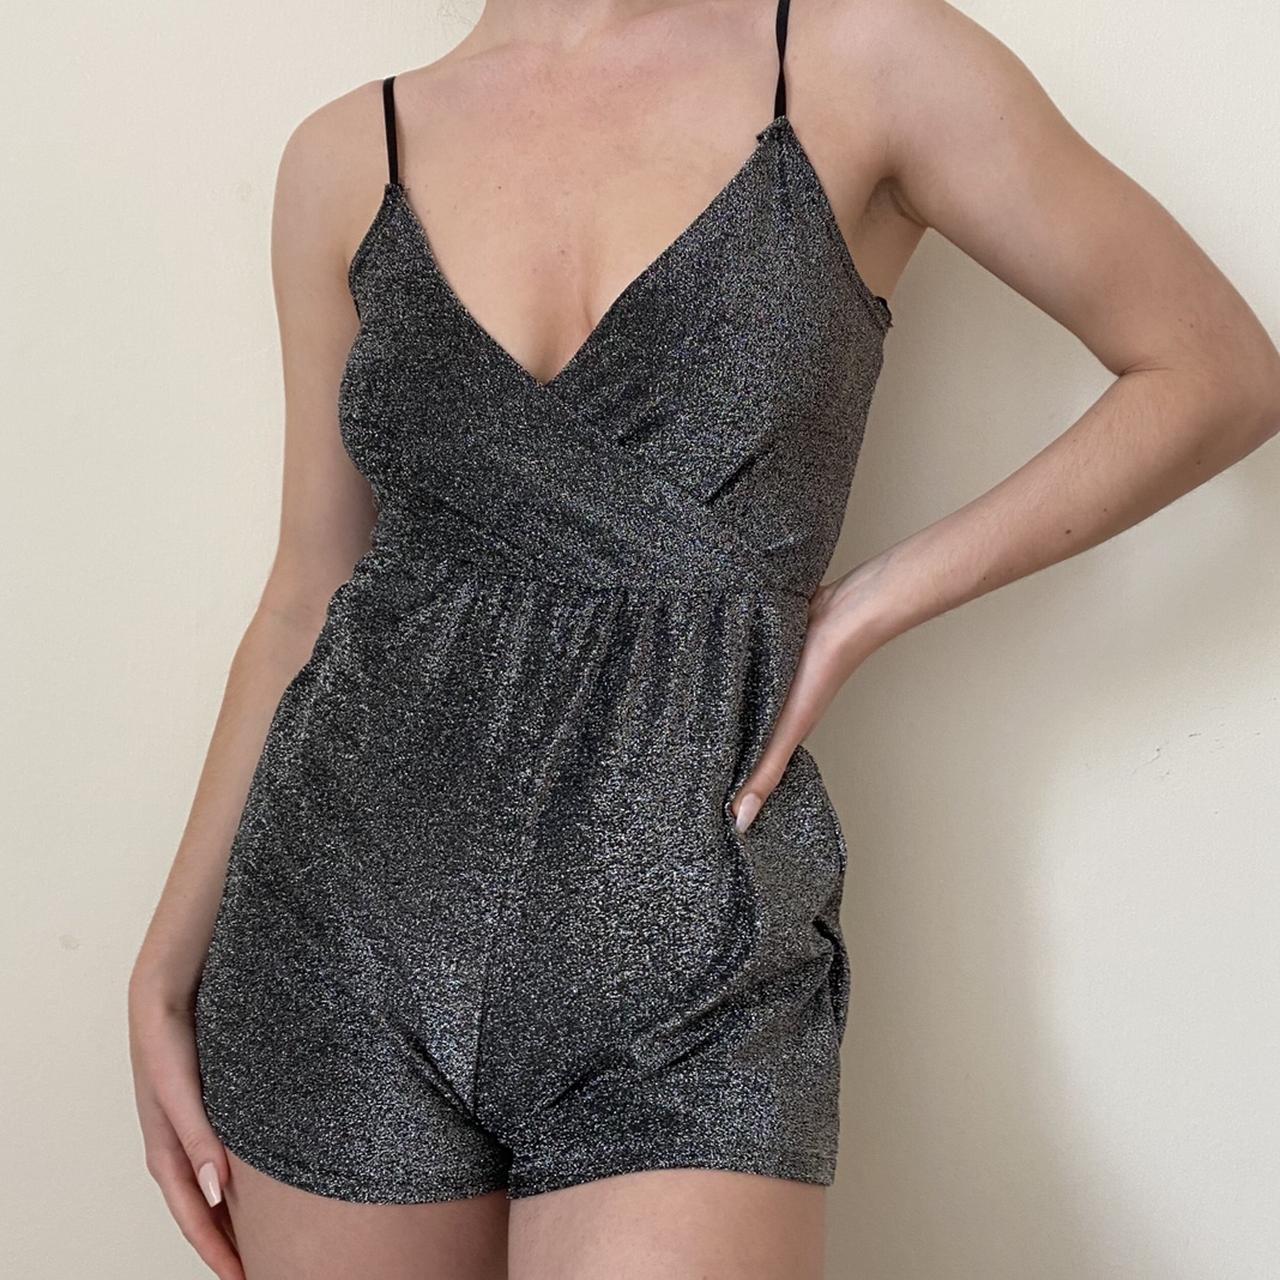 Sexy silver sparkly playsuit lbd with plunge - Depop